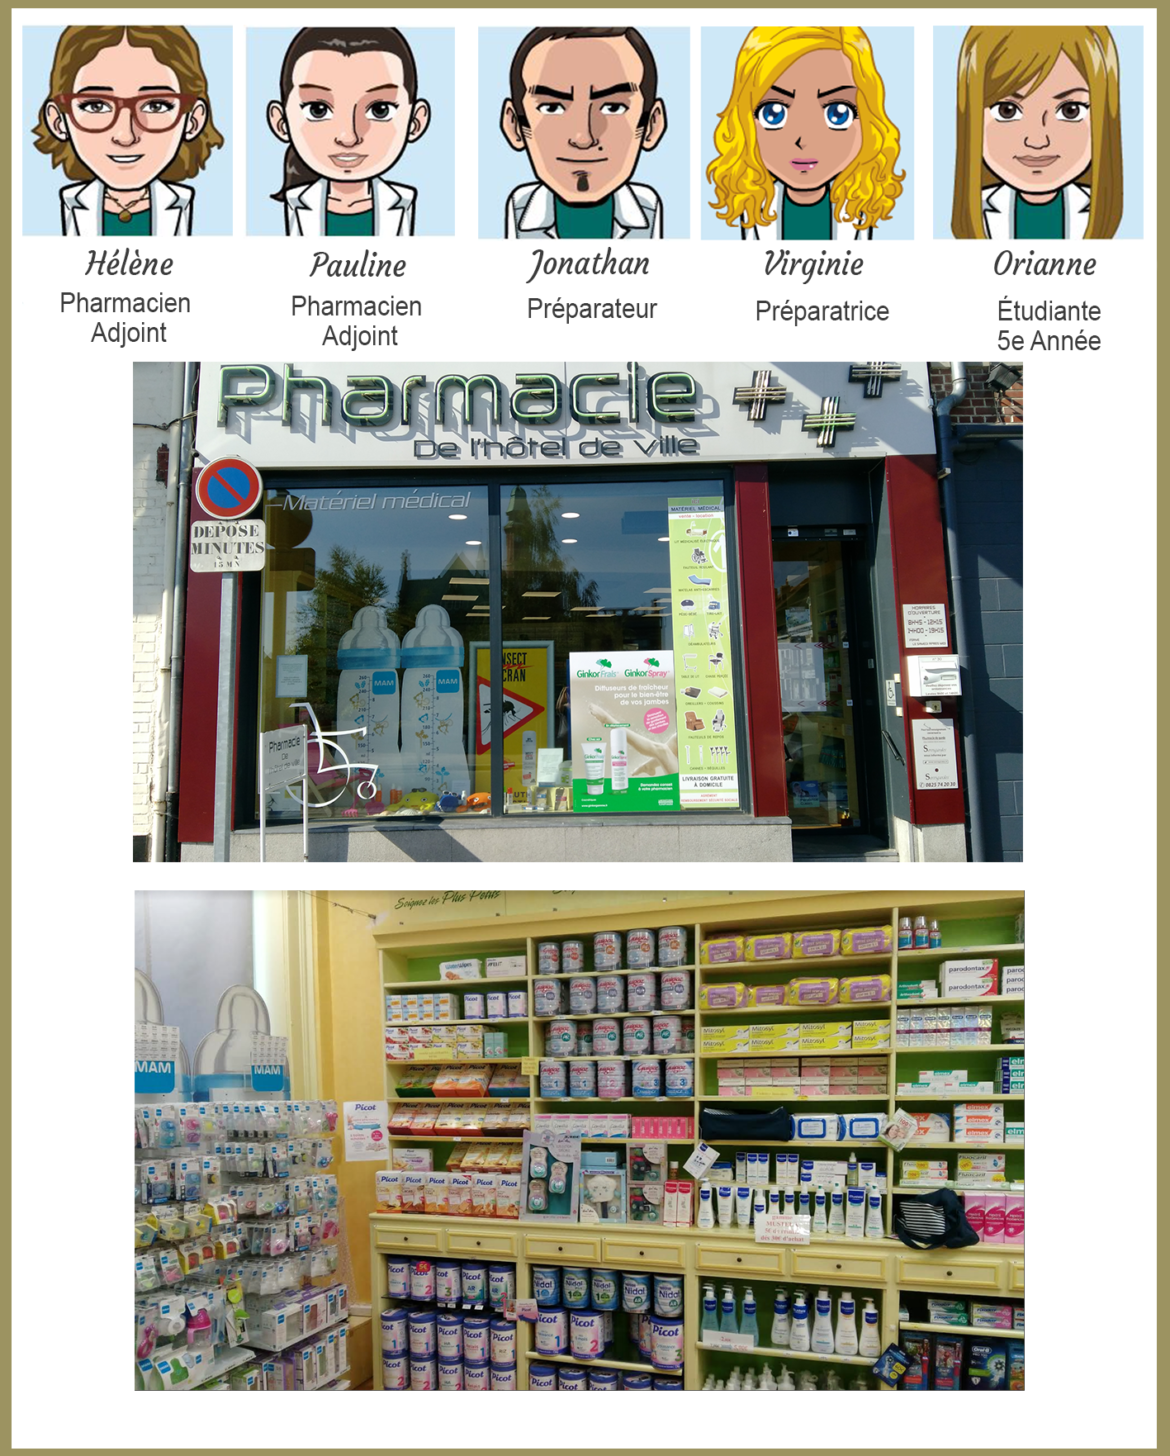 equipe-pharmacie-hotel-de-vlle-1.png